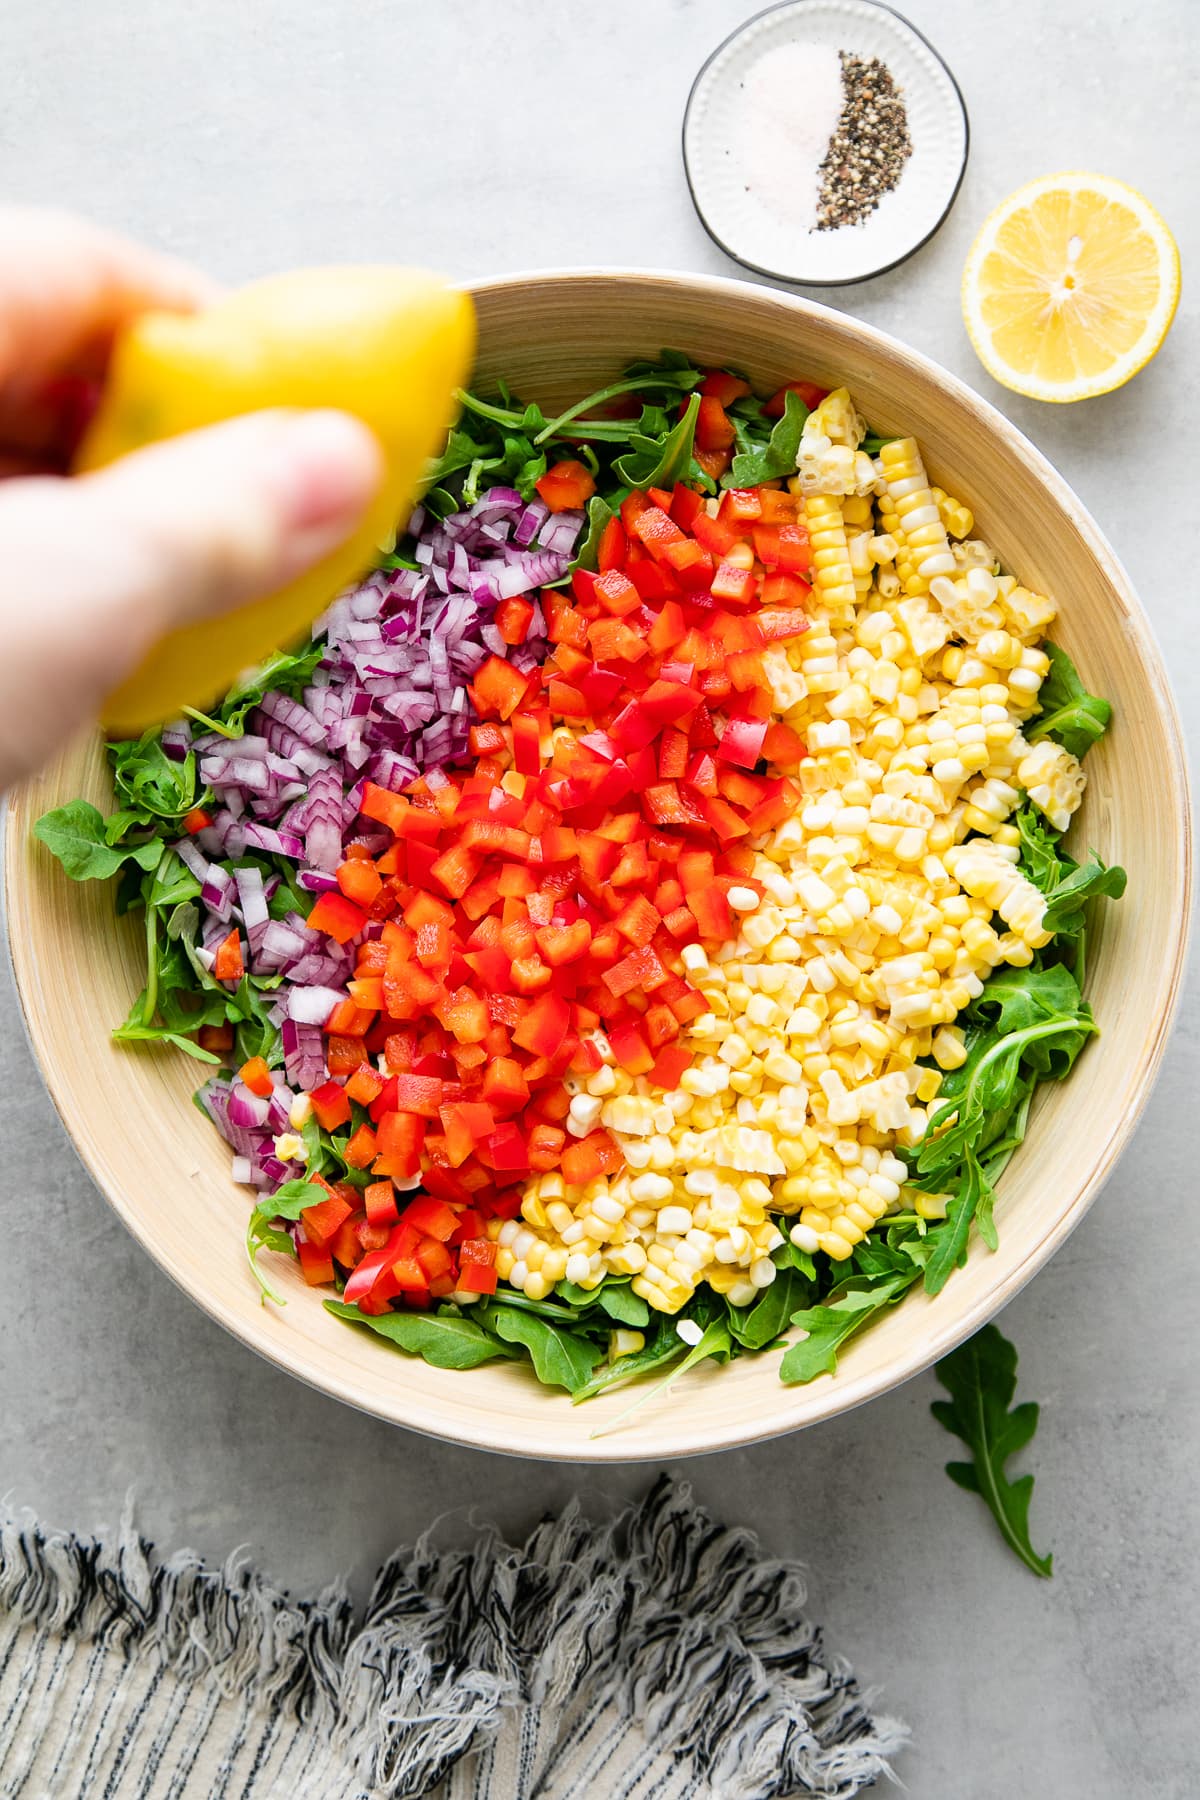 top down view of bowl with corn arugula salad ingredients added and lemon drizzled over top.